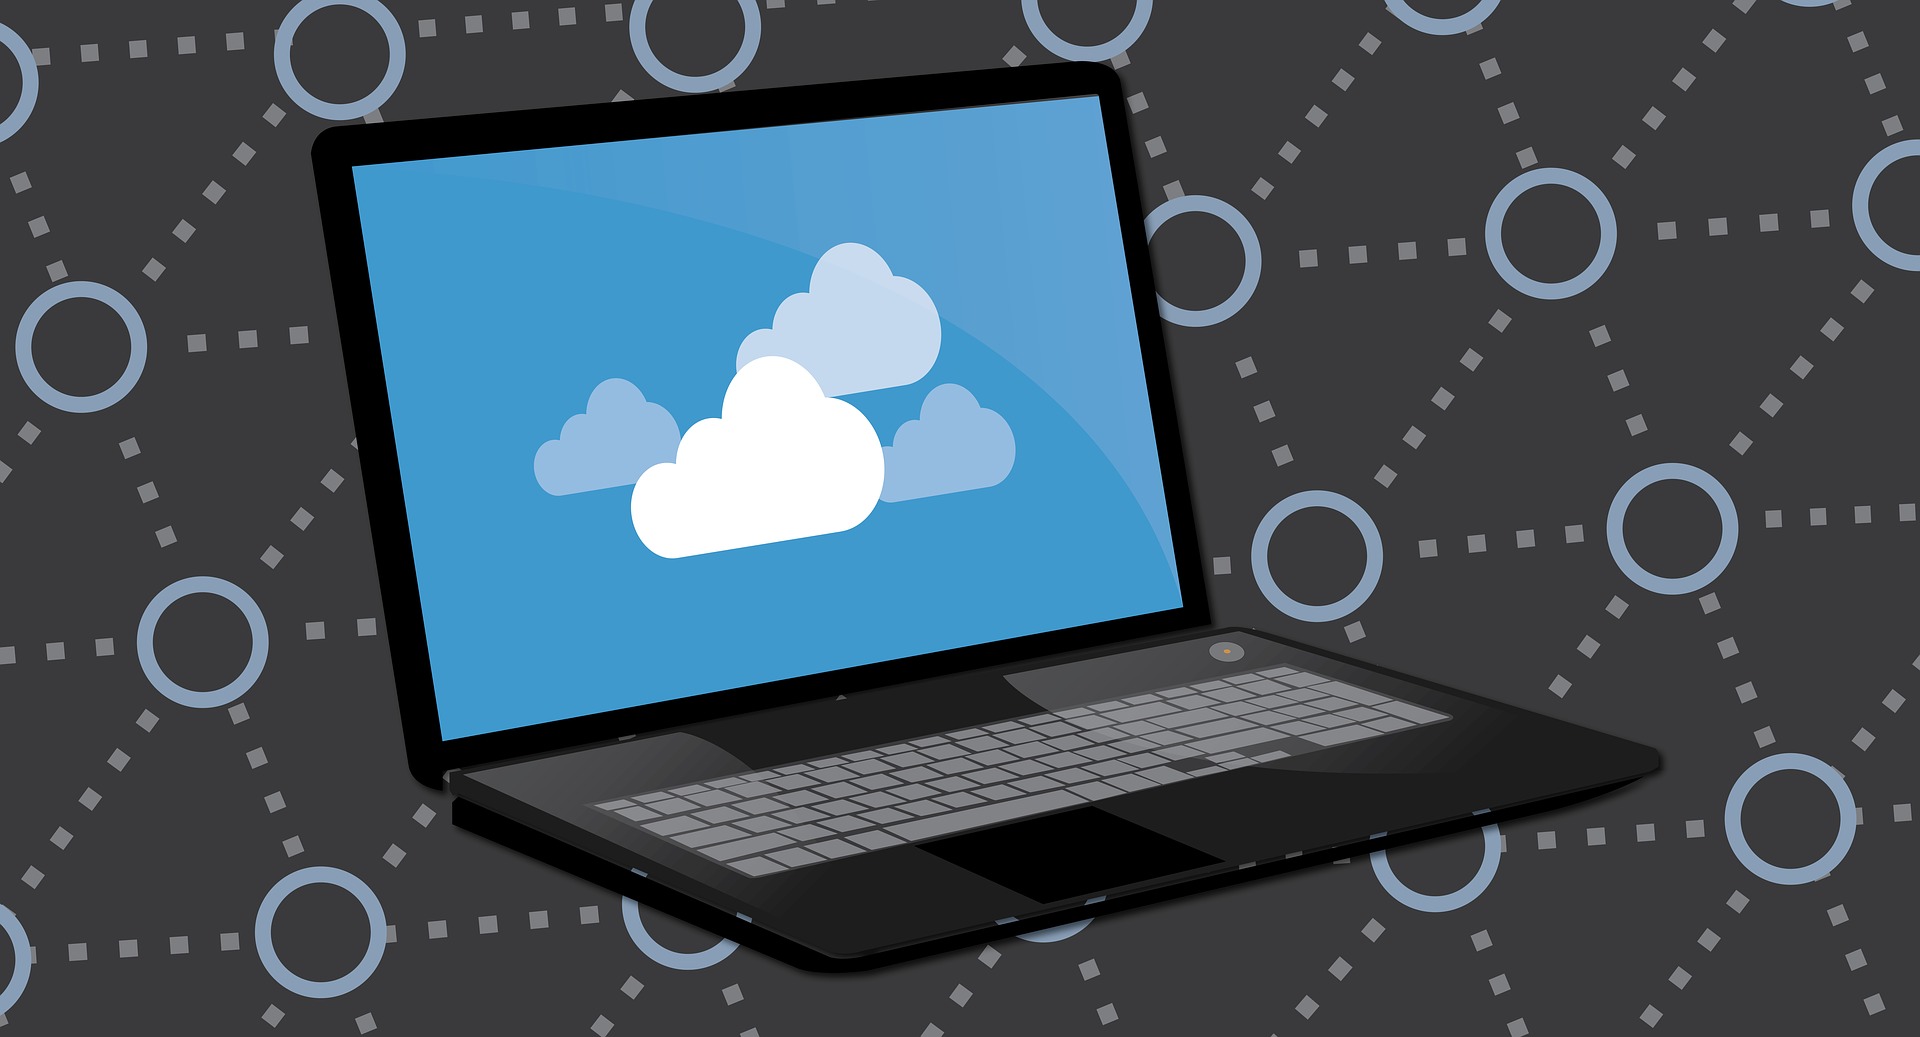 computer screen showing clouds to depict cloud backup